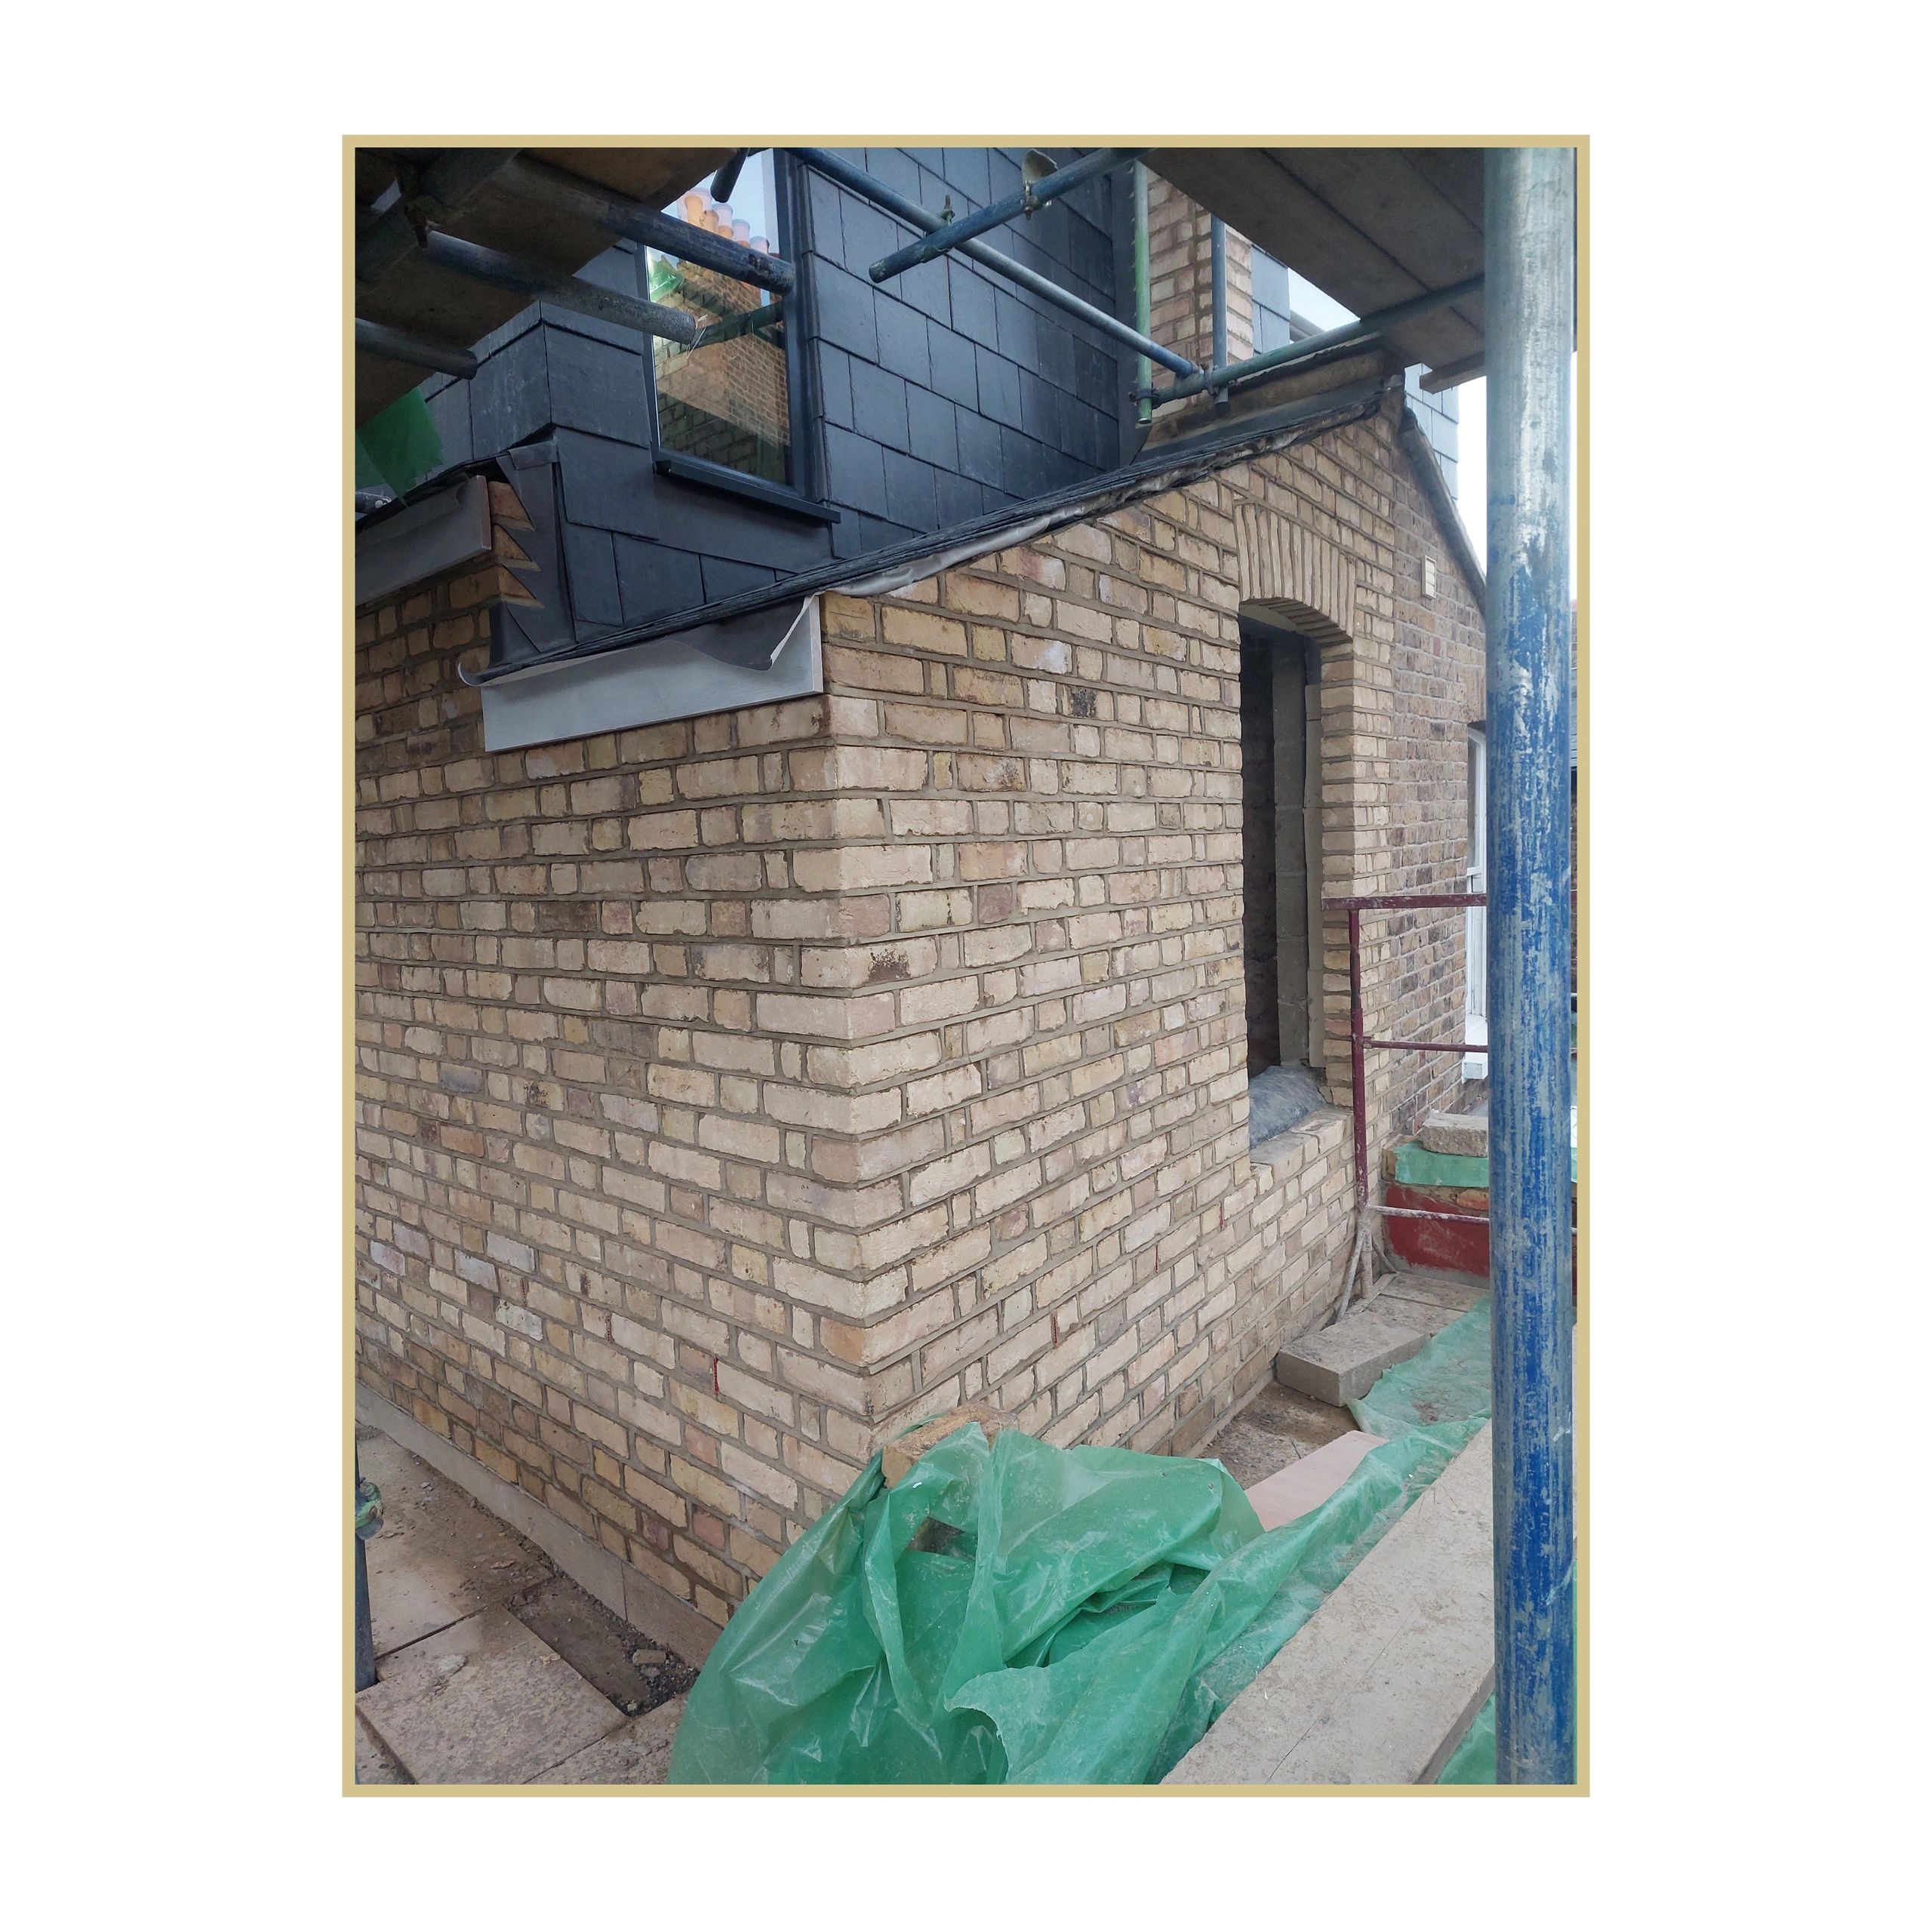 bricklaying contractors
brick layers near me
brickwork contractors near me
pointing
repointing

